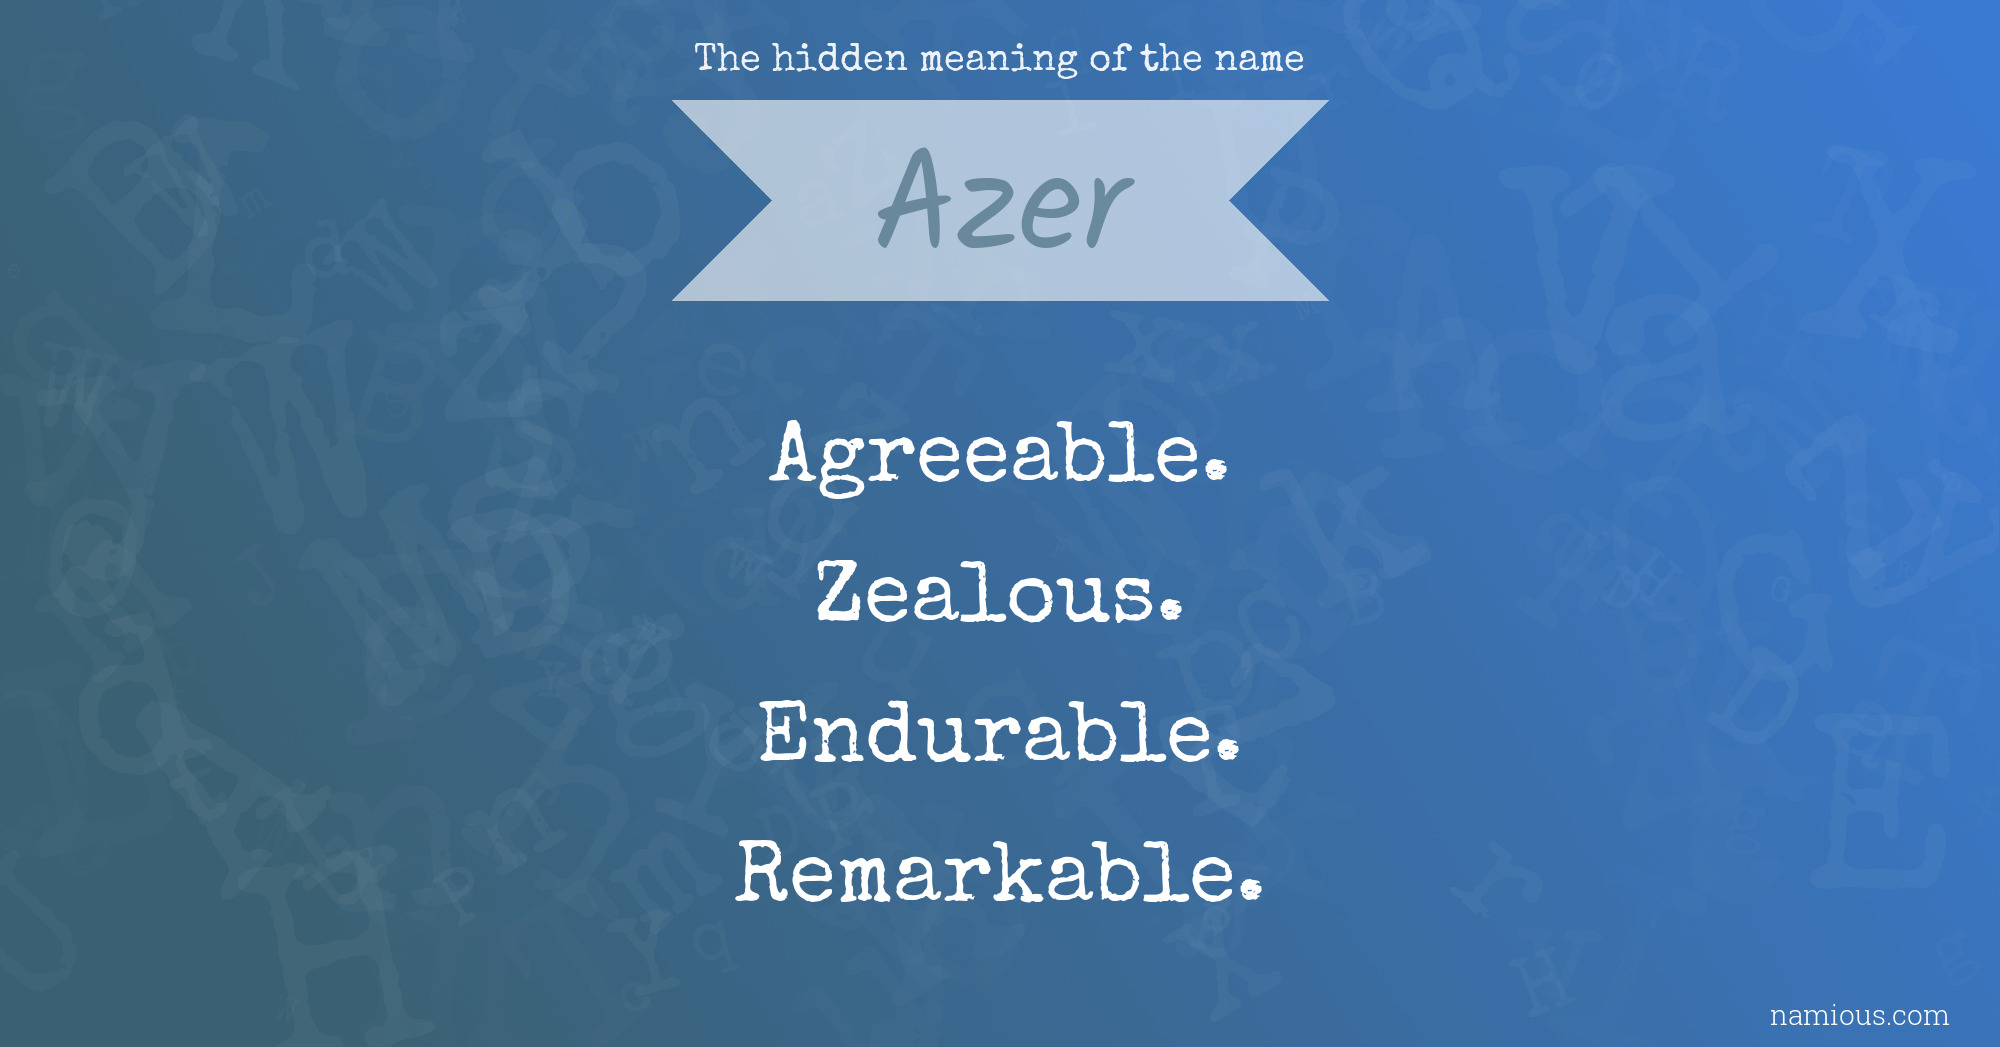 The hidden meaning of the name Azer